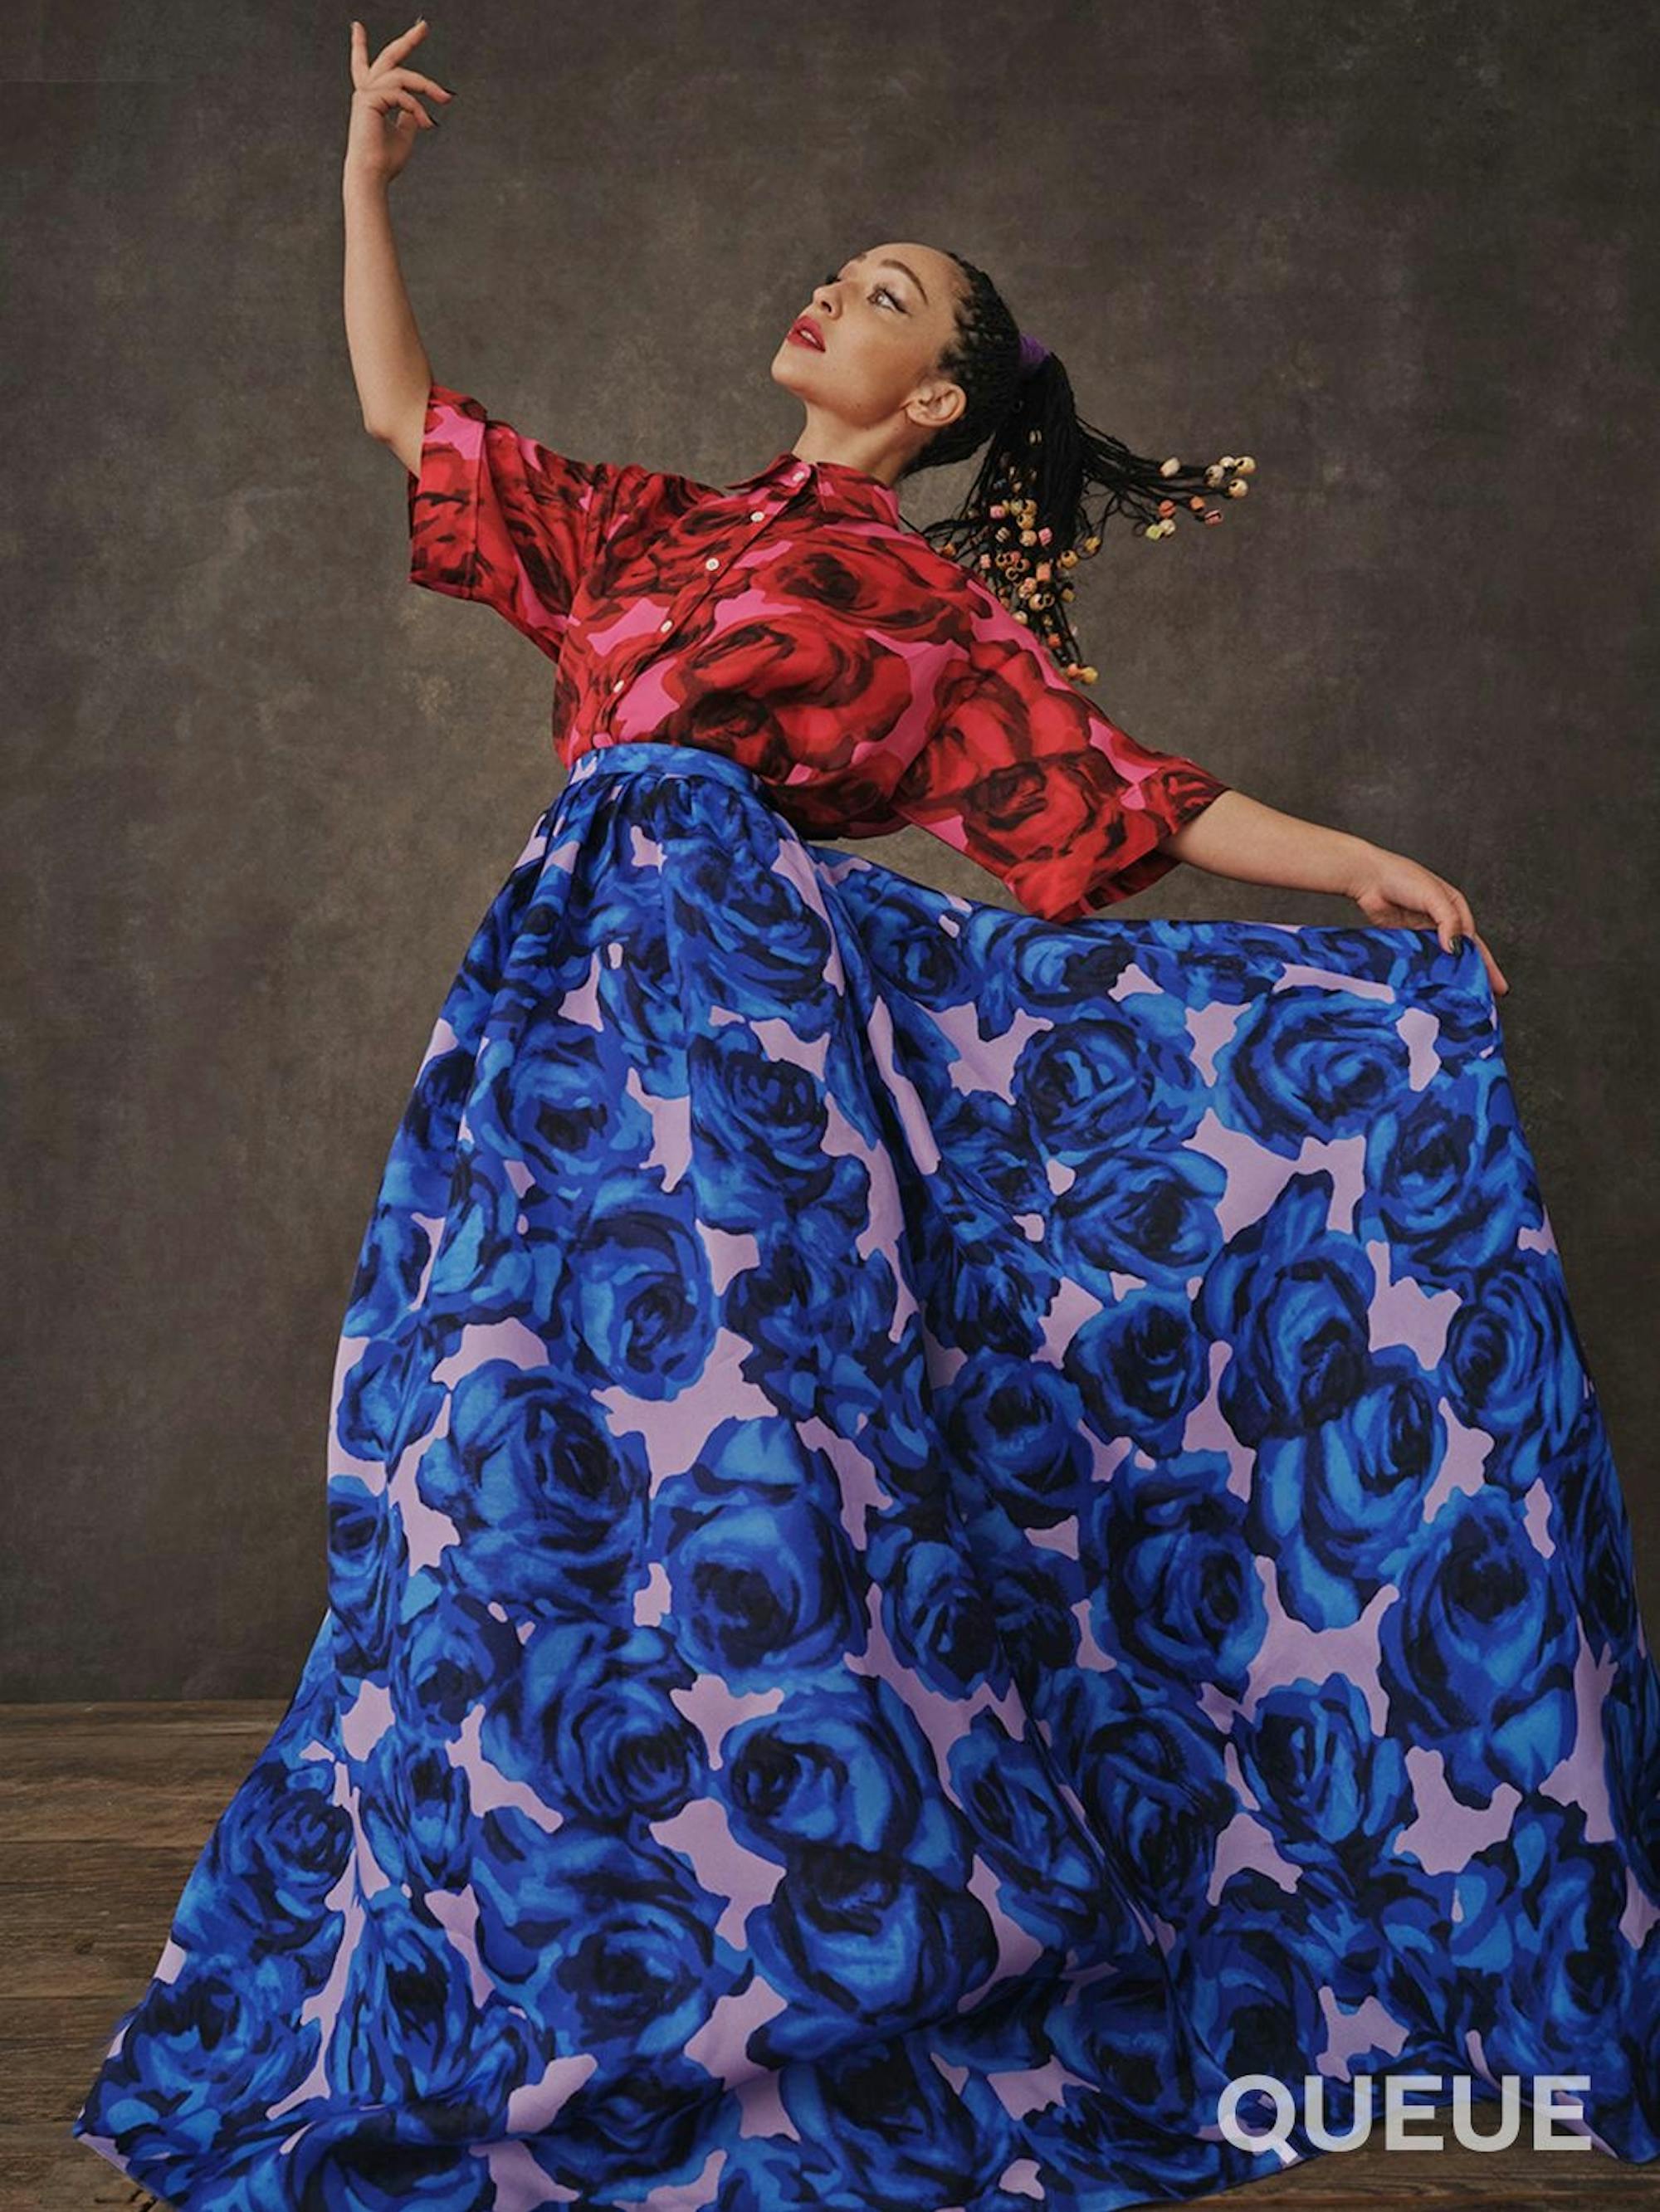 Ruth Negga wears a purple skirt with blue and black flowers, and a pink shirt with red and black flowers. They’re both shot mid dance move, giving these images movement and energy!